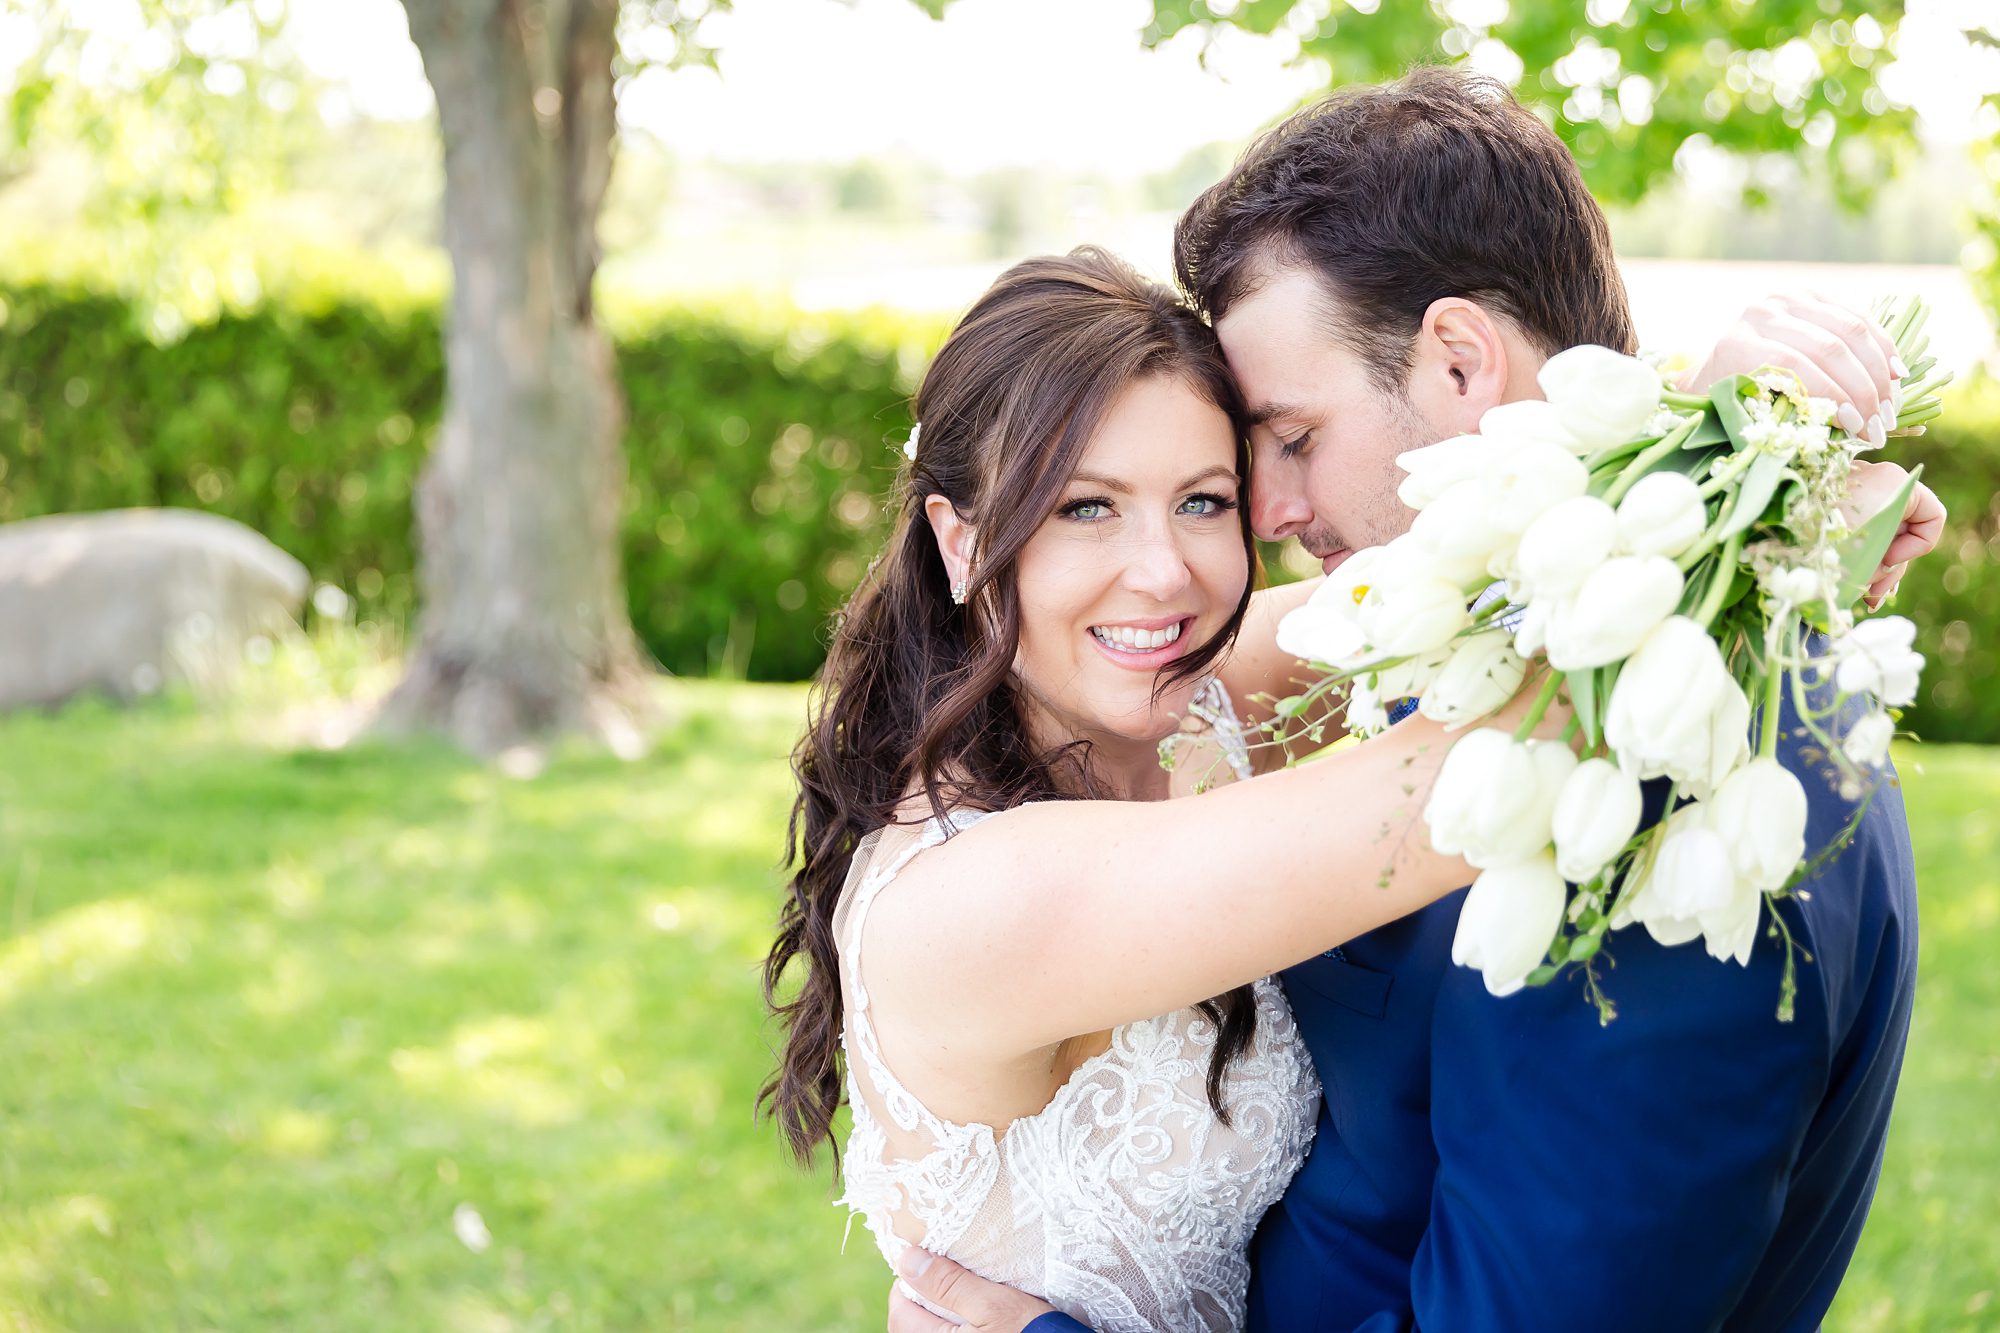 Bride and groom pose during outdoor wedding at StoneCropAcres Winery and Vineyard in Morrisburg, ON